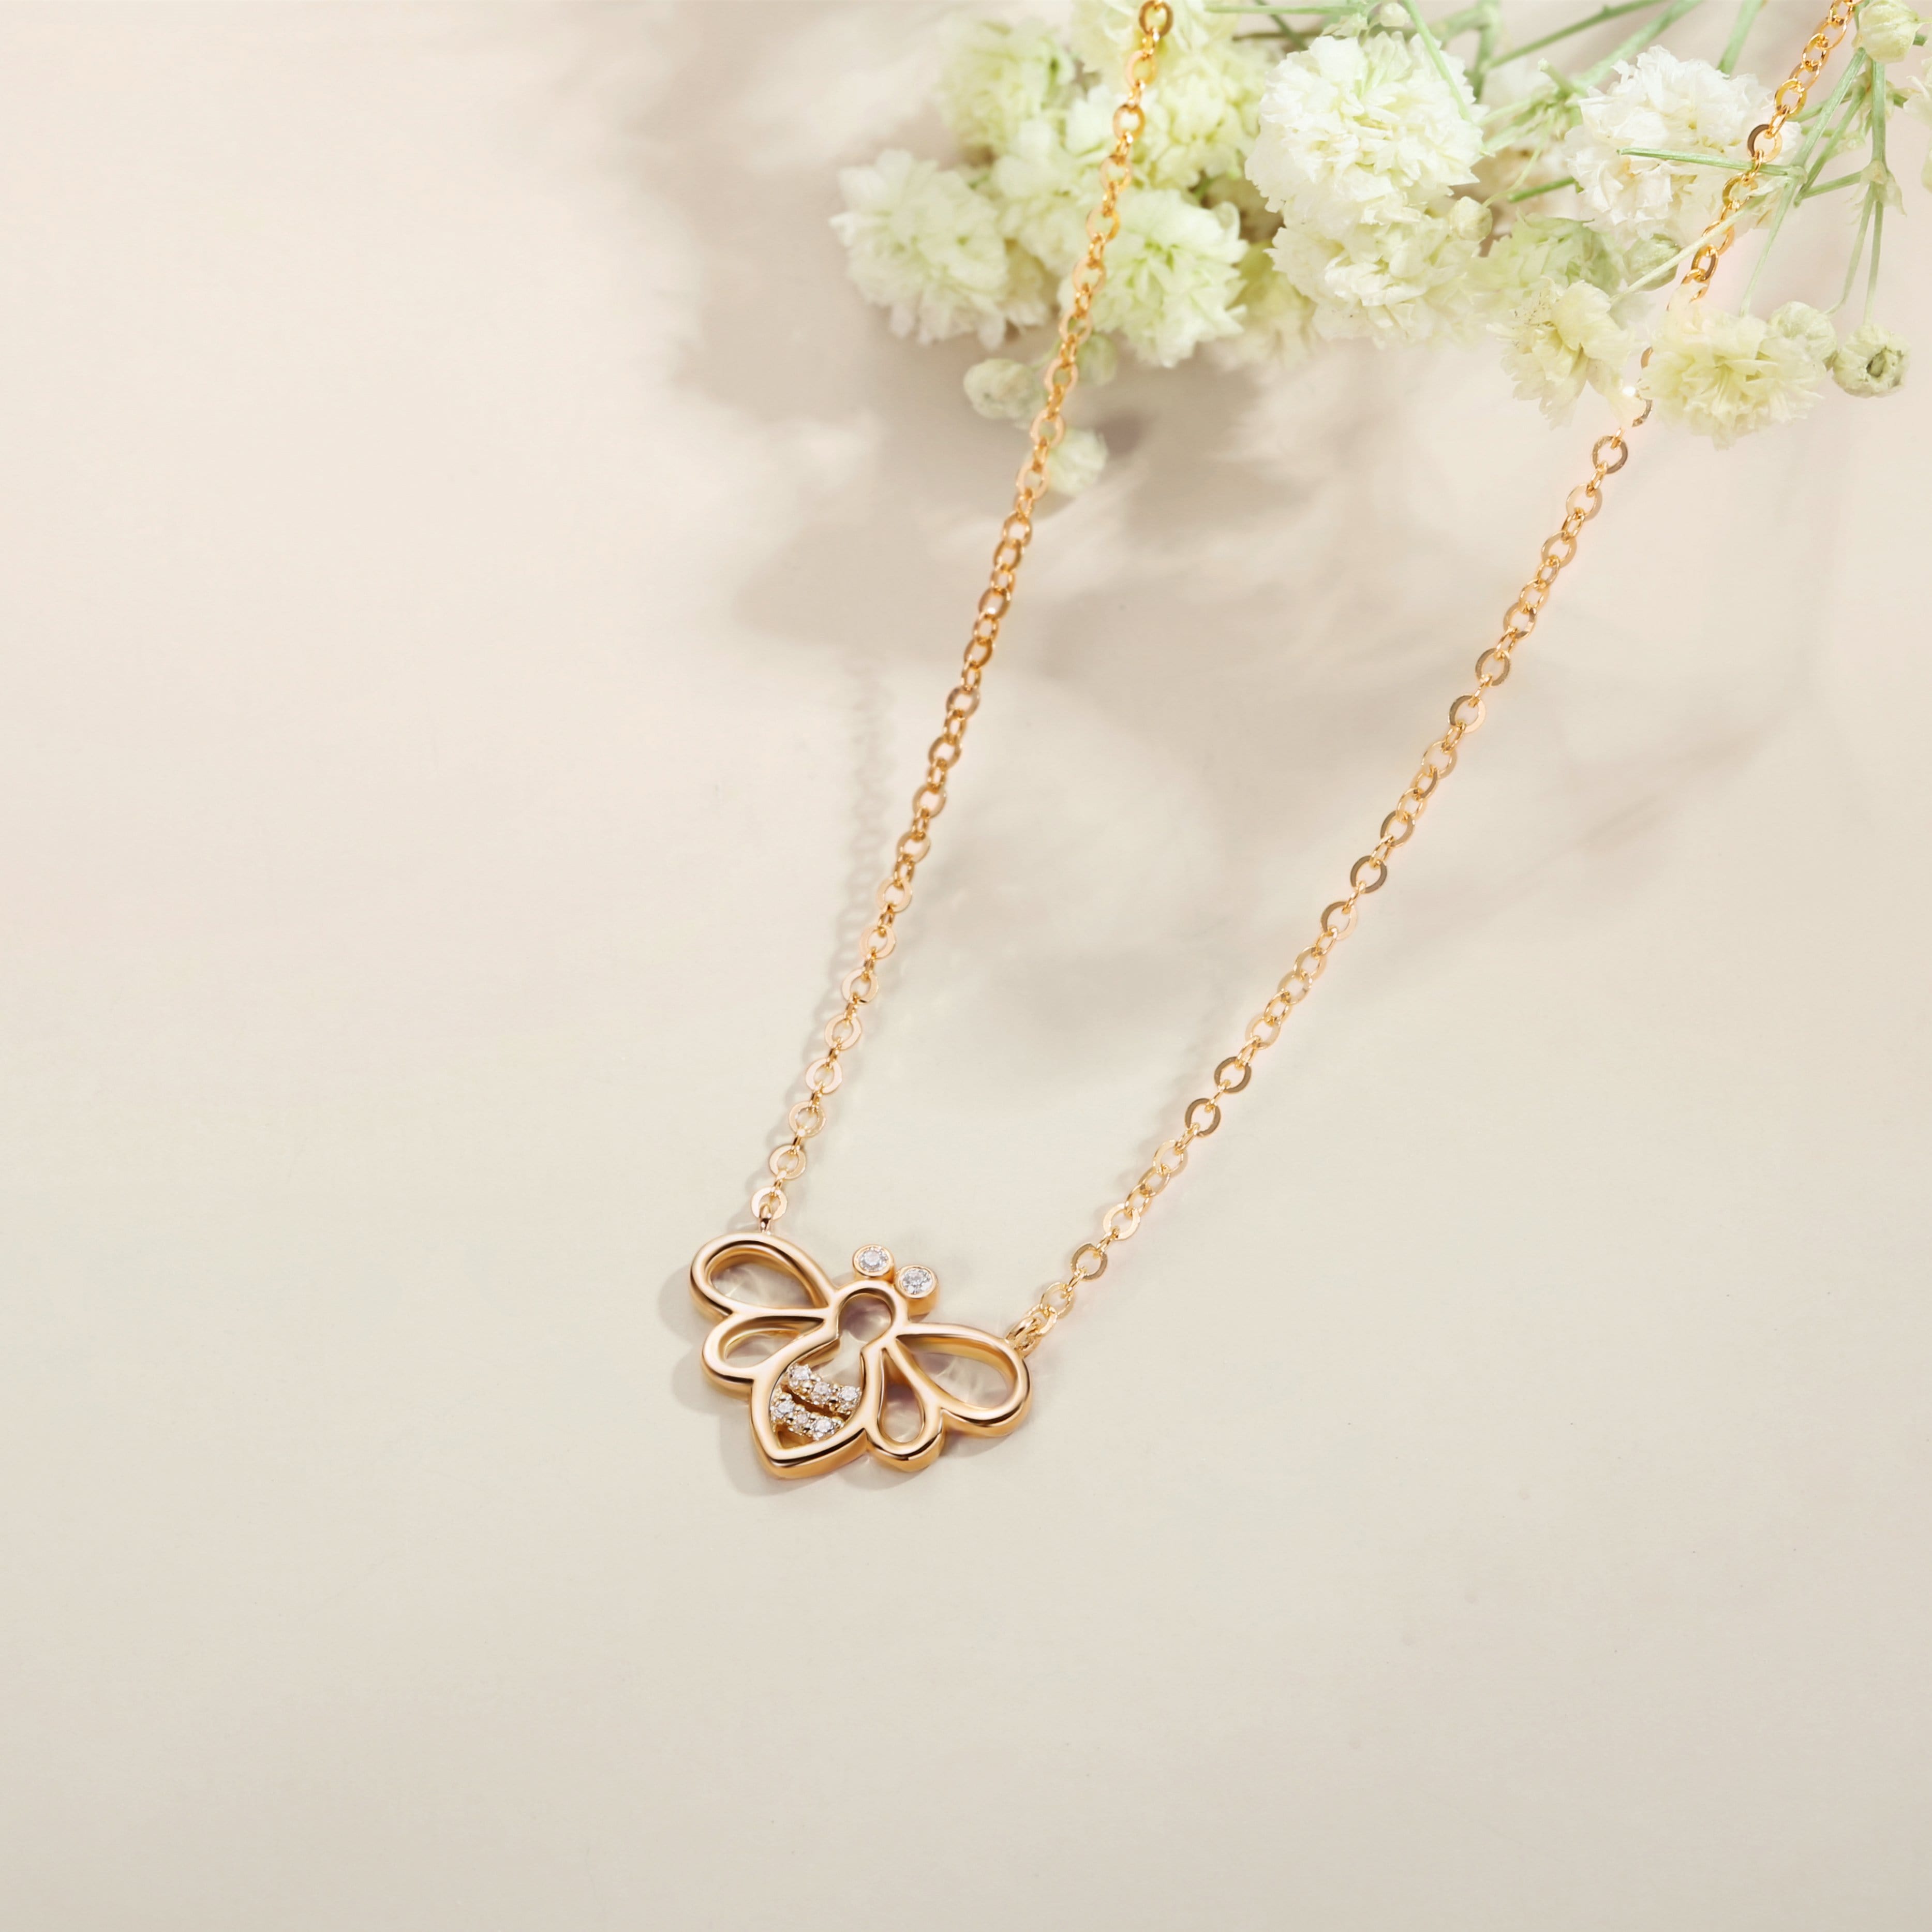 Fancime "Be Bright" Minimalist Dainty Bee Yellow Gold Necklace Show2